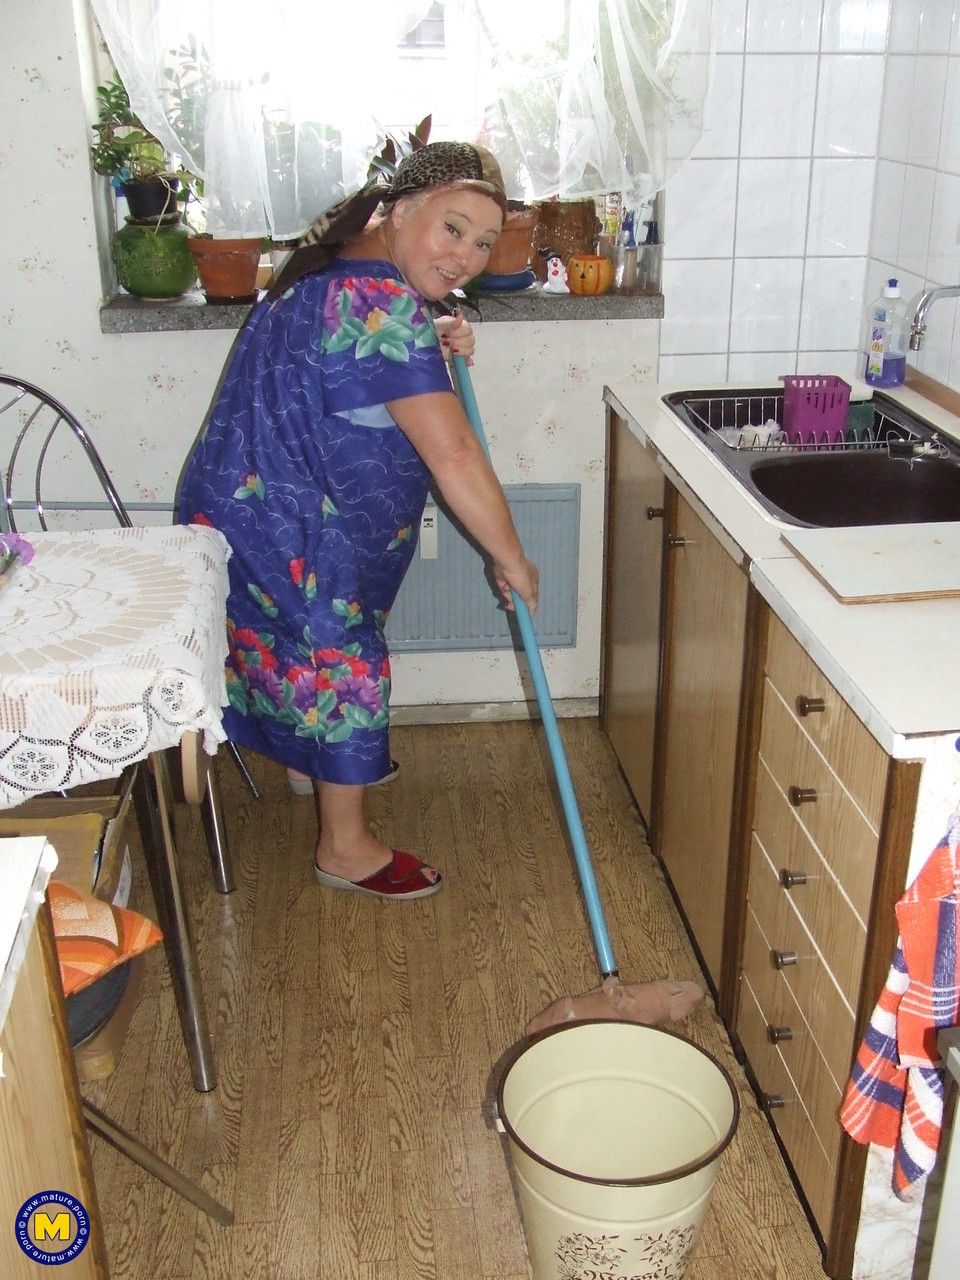 Fat granny Regina strips her clothes and poses while cleaning the kitchen 포르노 사진 #425872085 | Mature NL Pics, Regina, Mature, 모바일 포르노